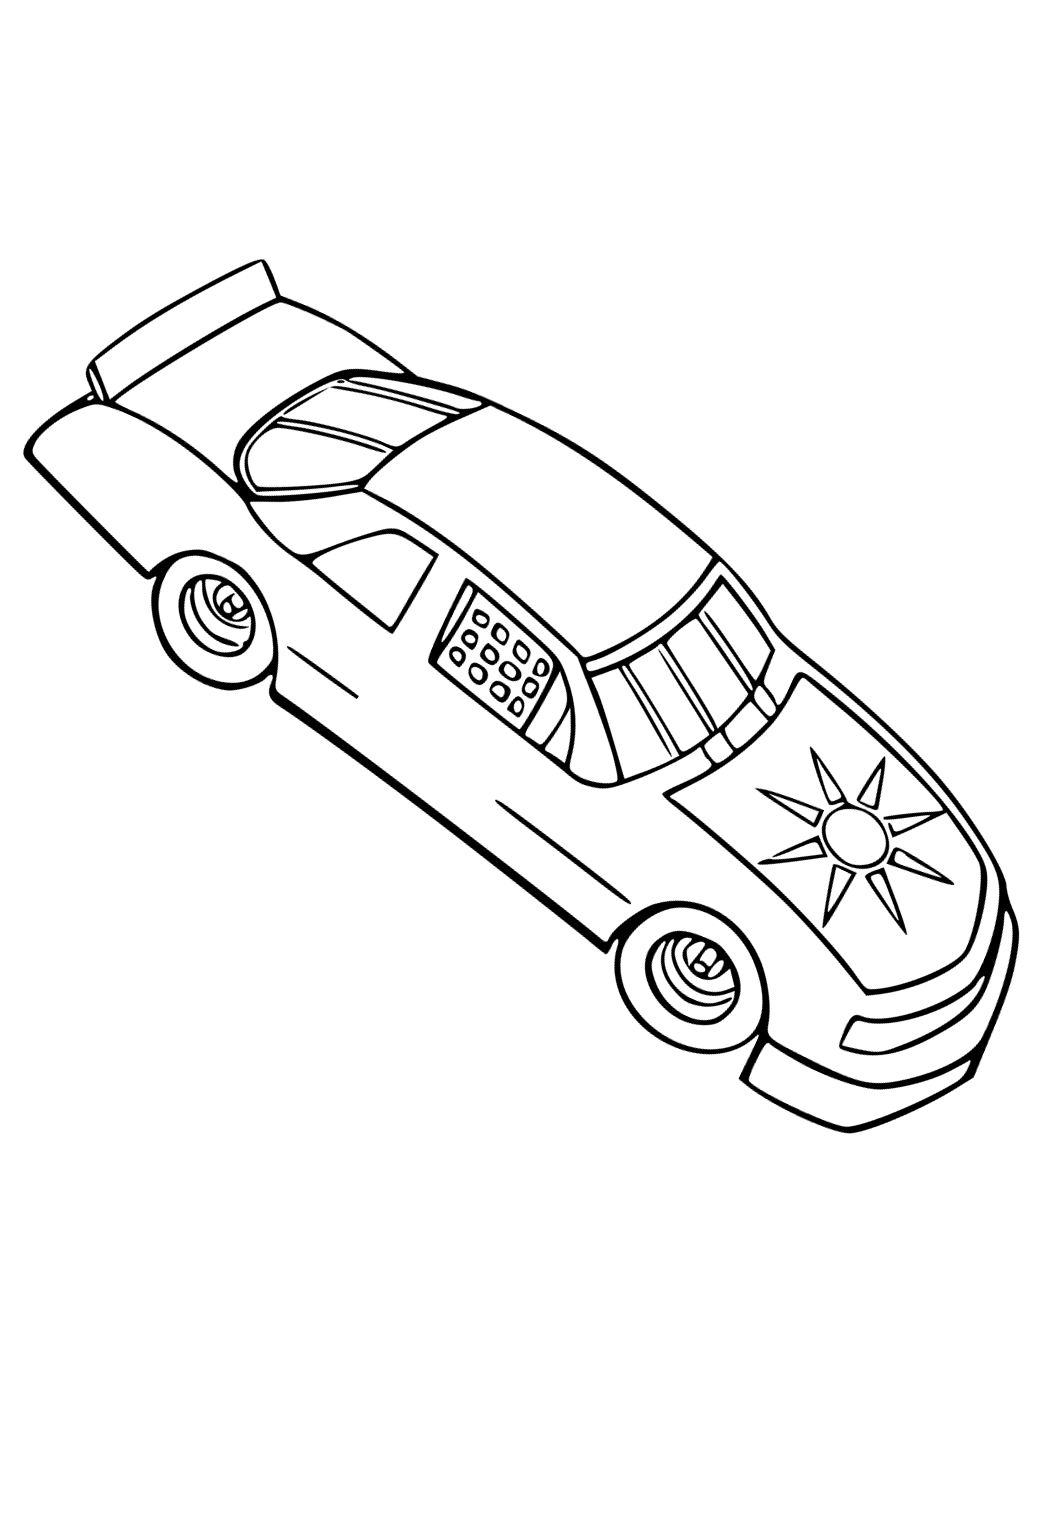 Free printable nascar sun coloring page for adults and kids